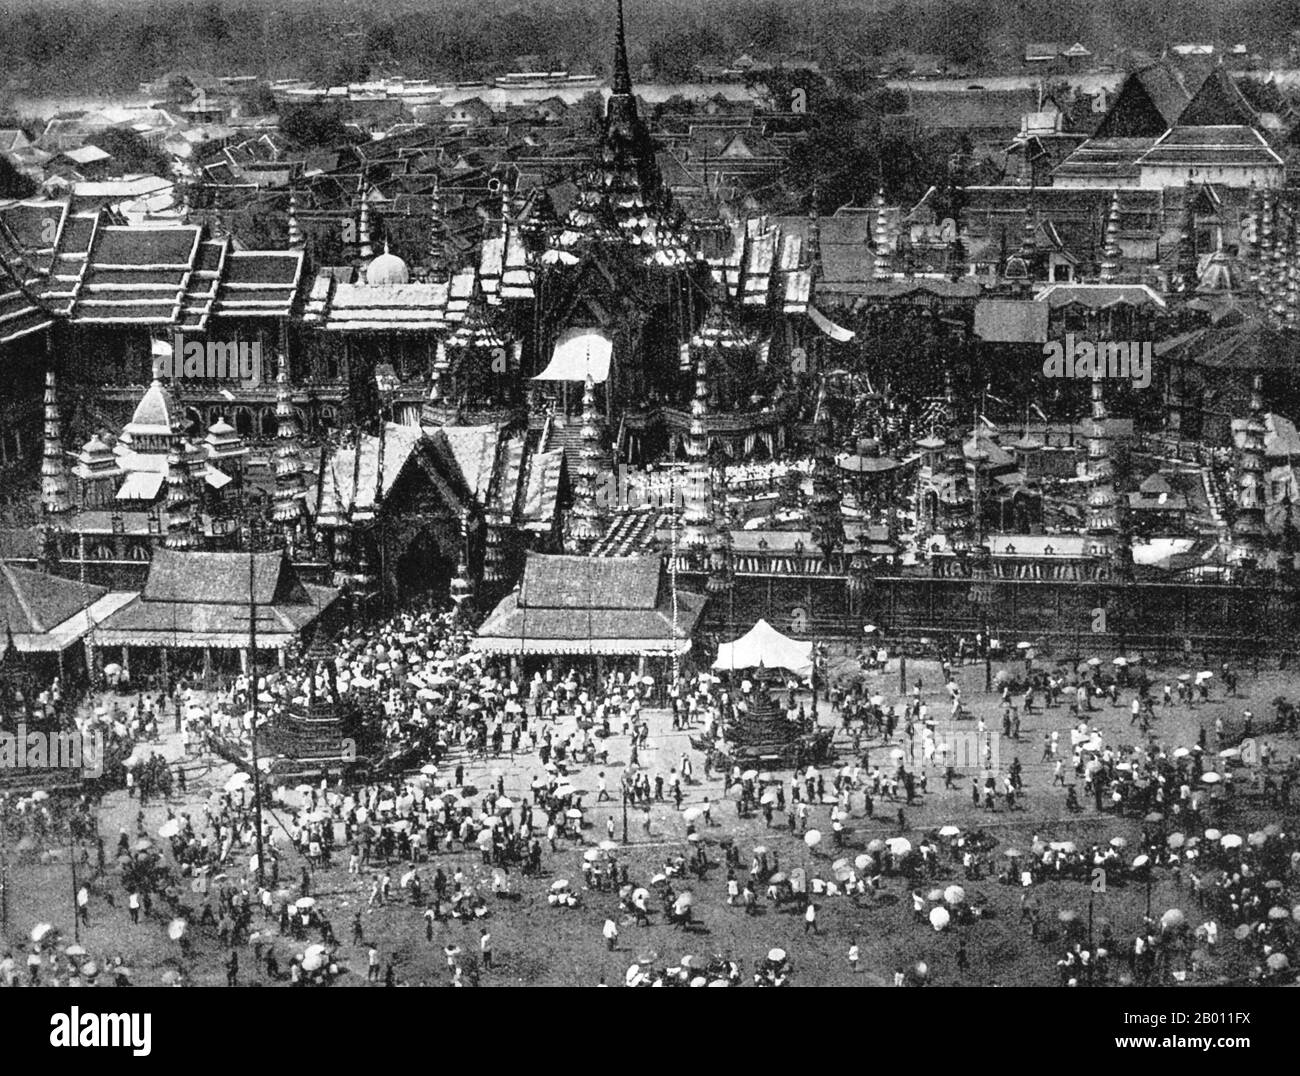 Thailand: A view of the temple and pavilions constructed for the cremation ceremony of two princes during the reign of King Chulalongkorn (1868-1910) in Bangkok.  Situated in front of the Grand Palace in central Bangkok, this 60m temple was originally constructed for the cremation of King Mongkut (r. 1851—68) who died of malaria after a trip to Prachuap Khiri Khan province to witness a total solar eclipse. Known as Mount Meru, after the sacred mountain in Hindu and Buddhist cosmology, to symbolise the king's divinity, the temple was decorated in gold and mirror glass. Stock Photo